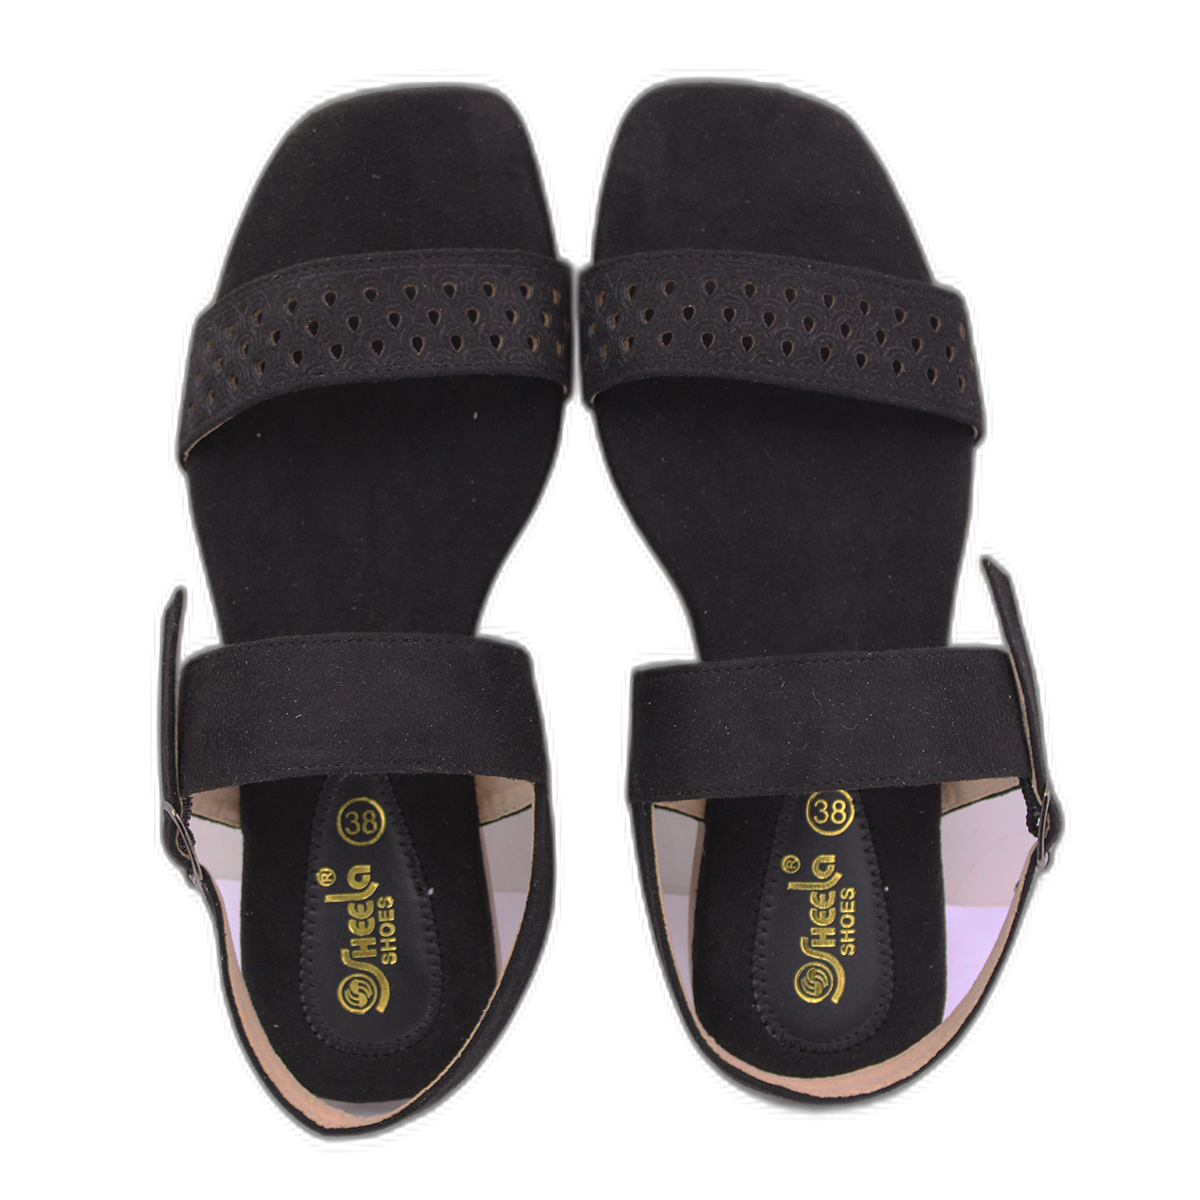 Mochi Black Flats Womens Sandal - Get Best Price from Manufacturers &  Suppliers in India